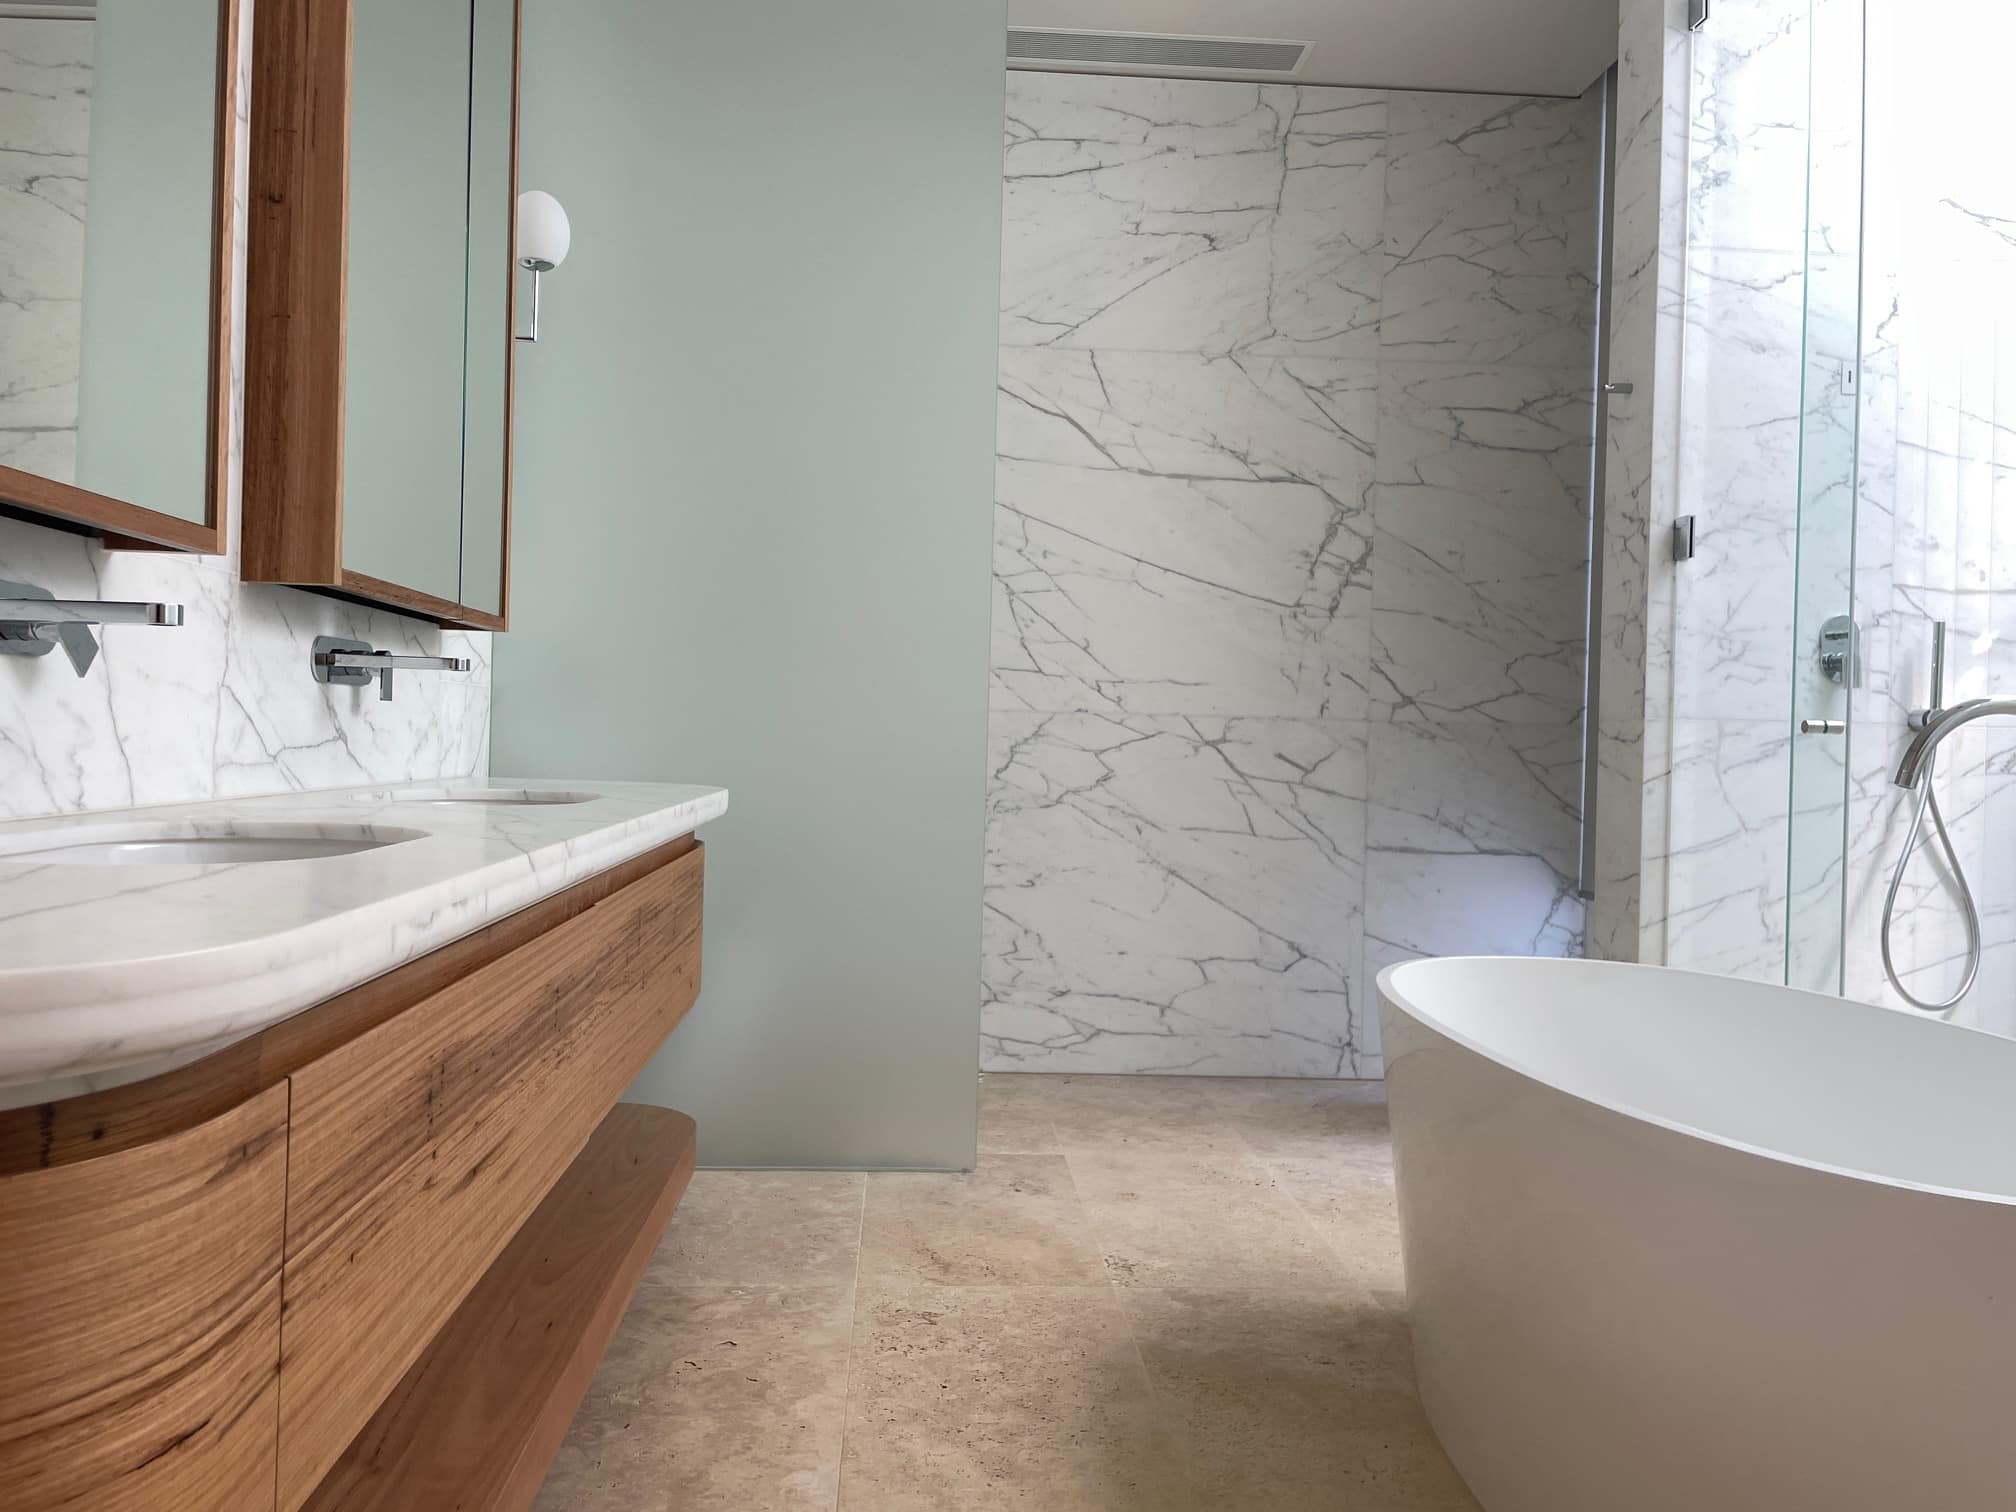 CALACATTA MARBLE_RMS TRADERS_NATURAL STONE BATHROOM KITCHEN TILES SLABS SUPPLIER MELBOURNE (7)